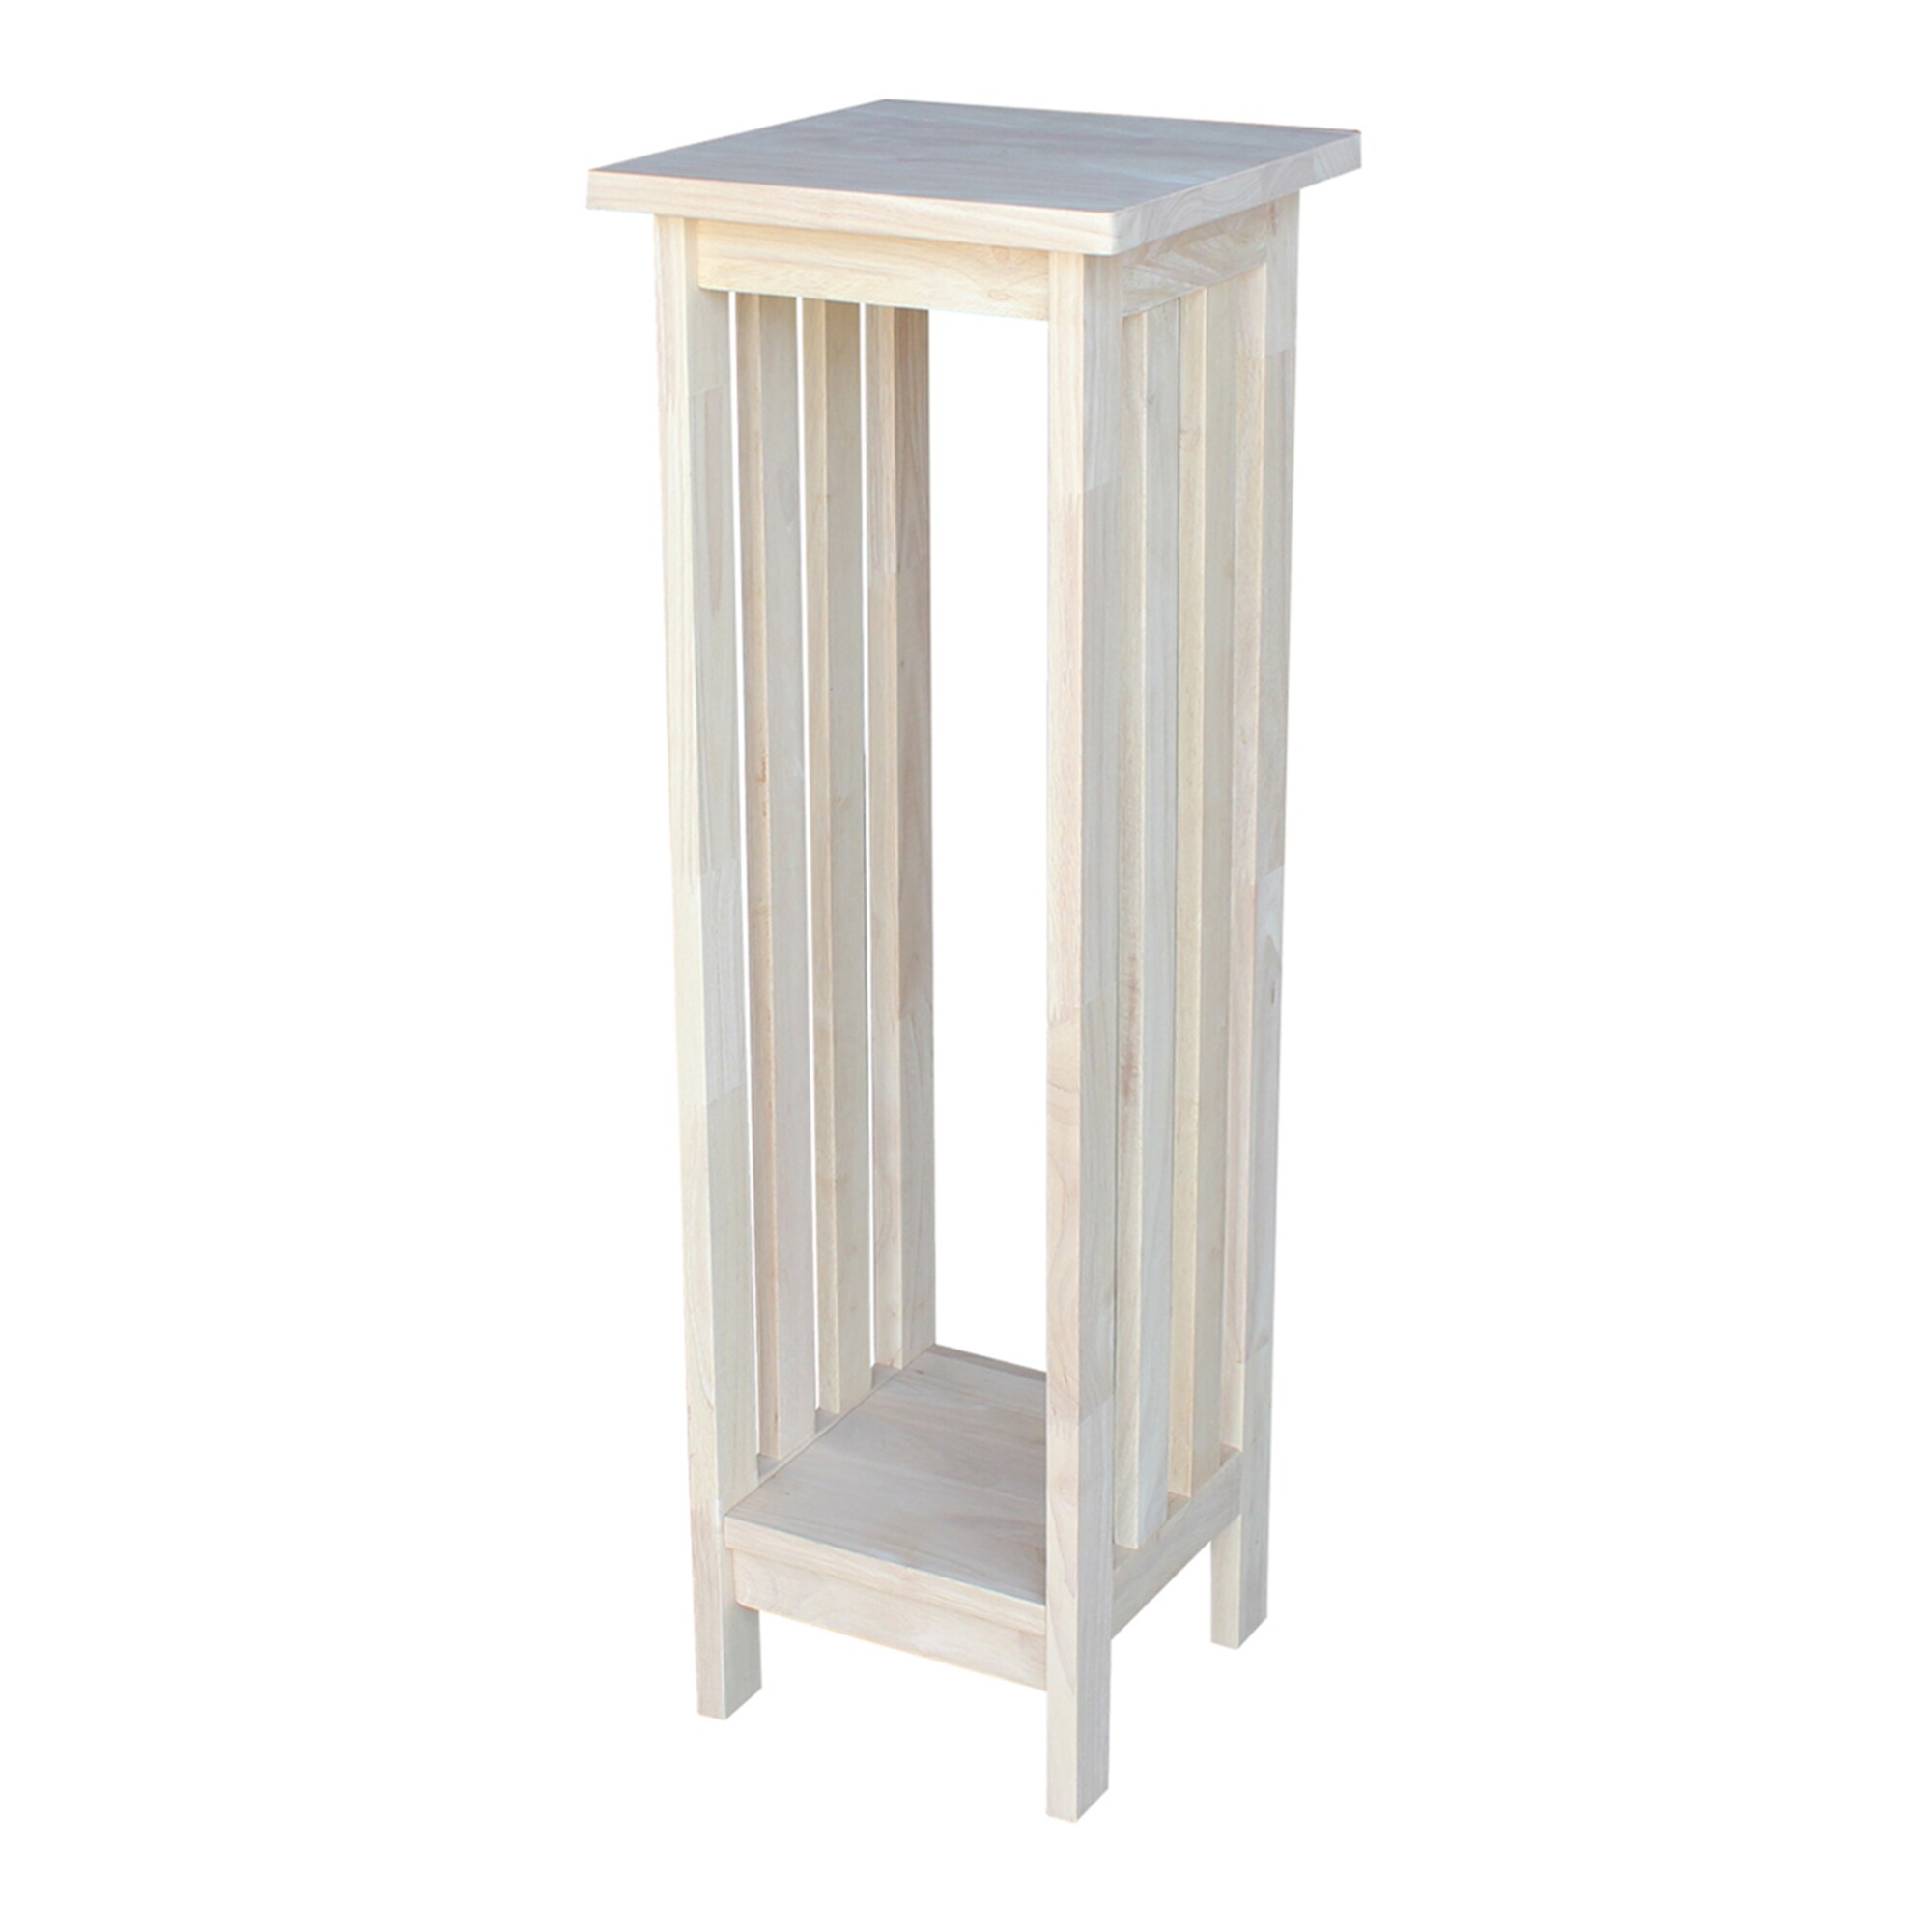 Square plant stand in different heights 50 cm, 60 cm or 70 cm,..